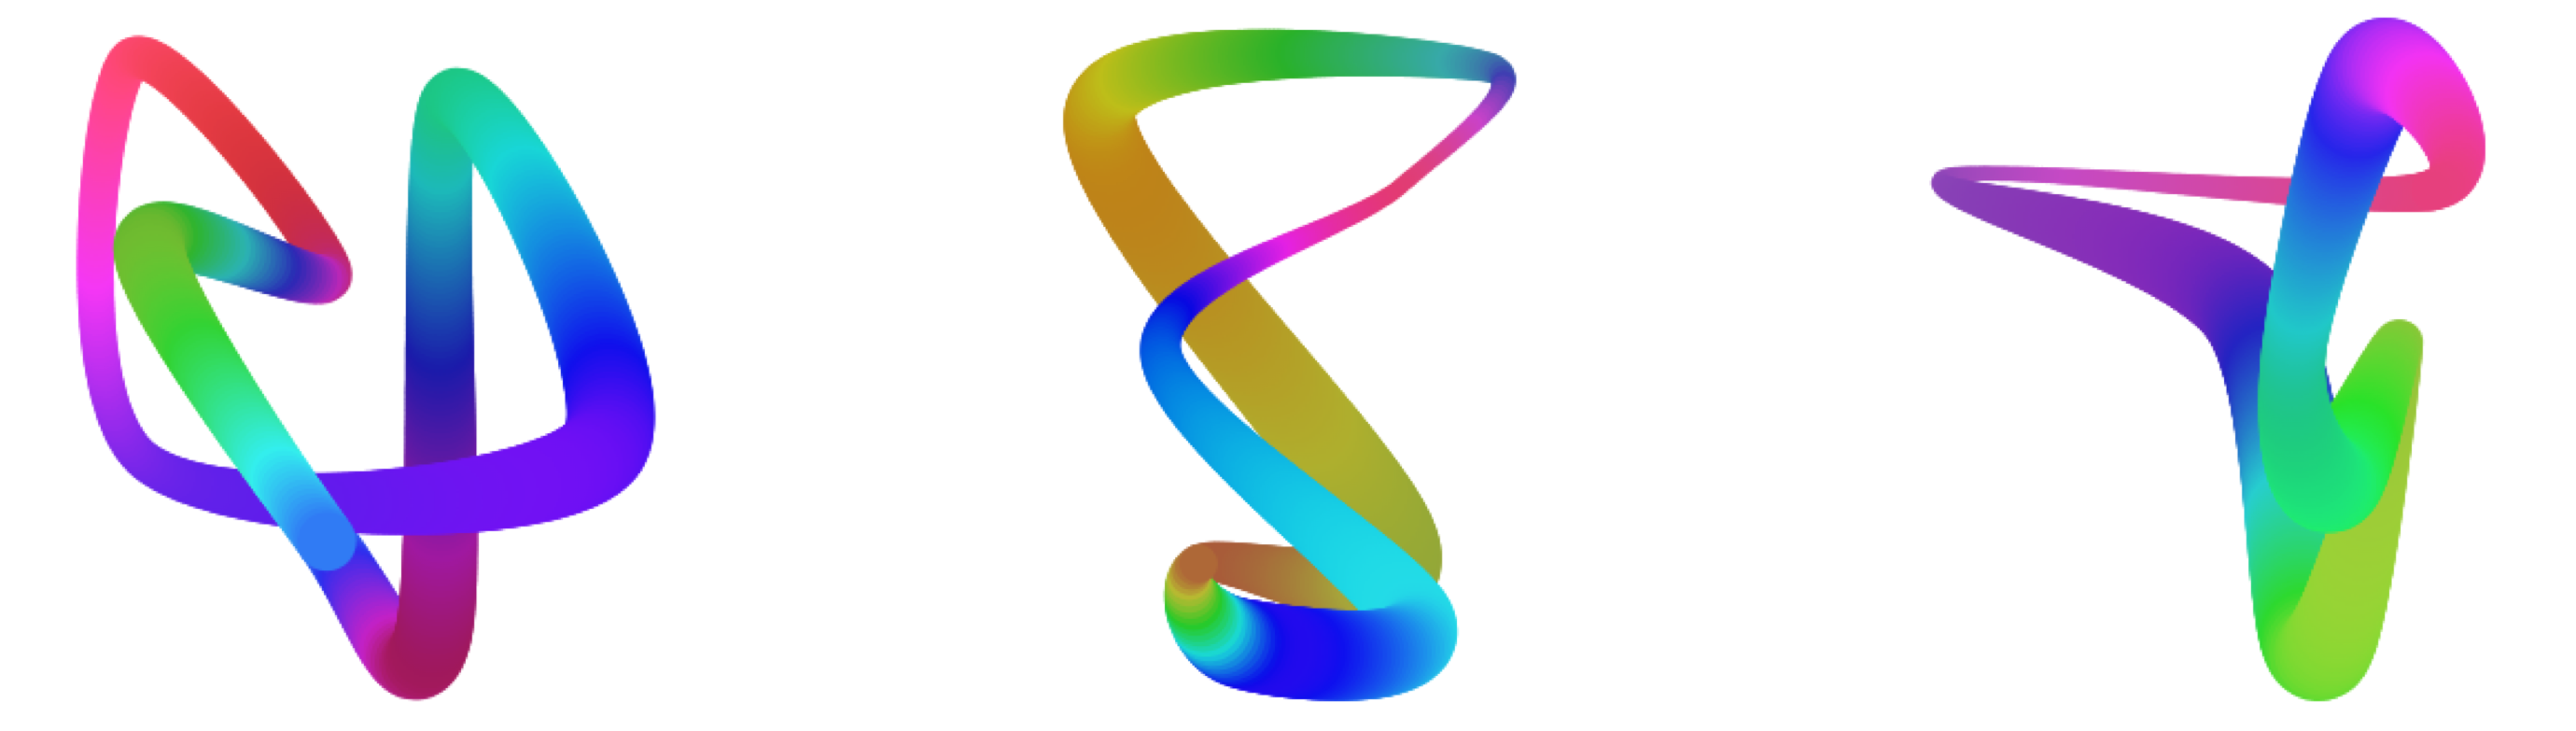 Colorful Catmull-Rom curves